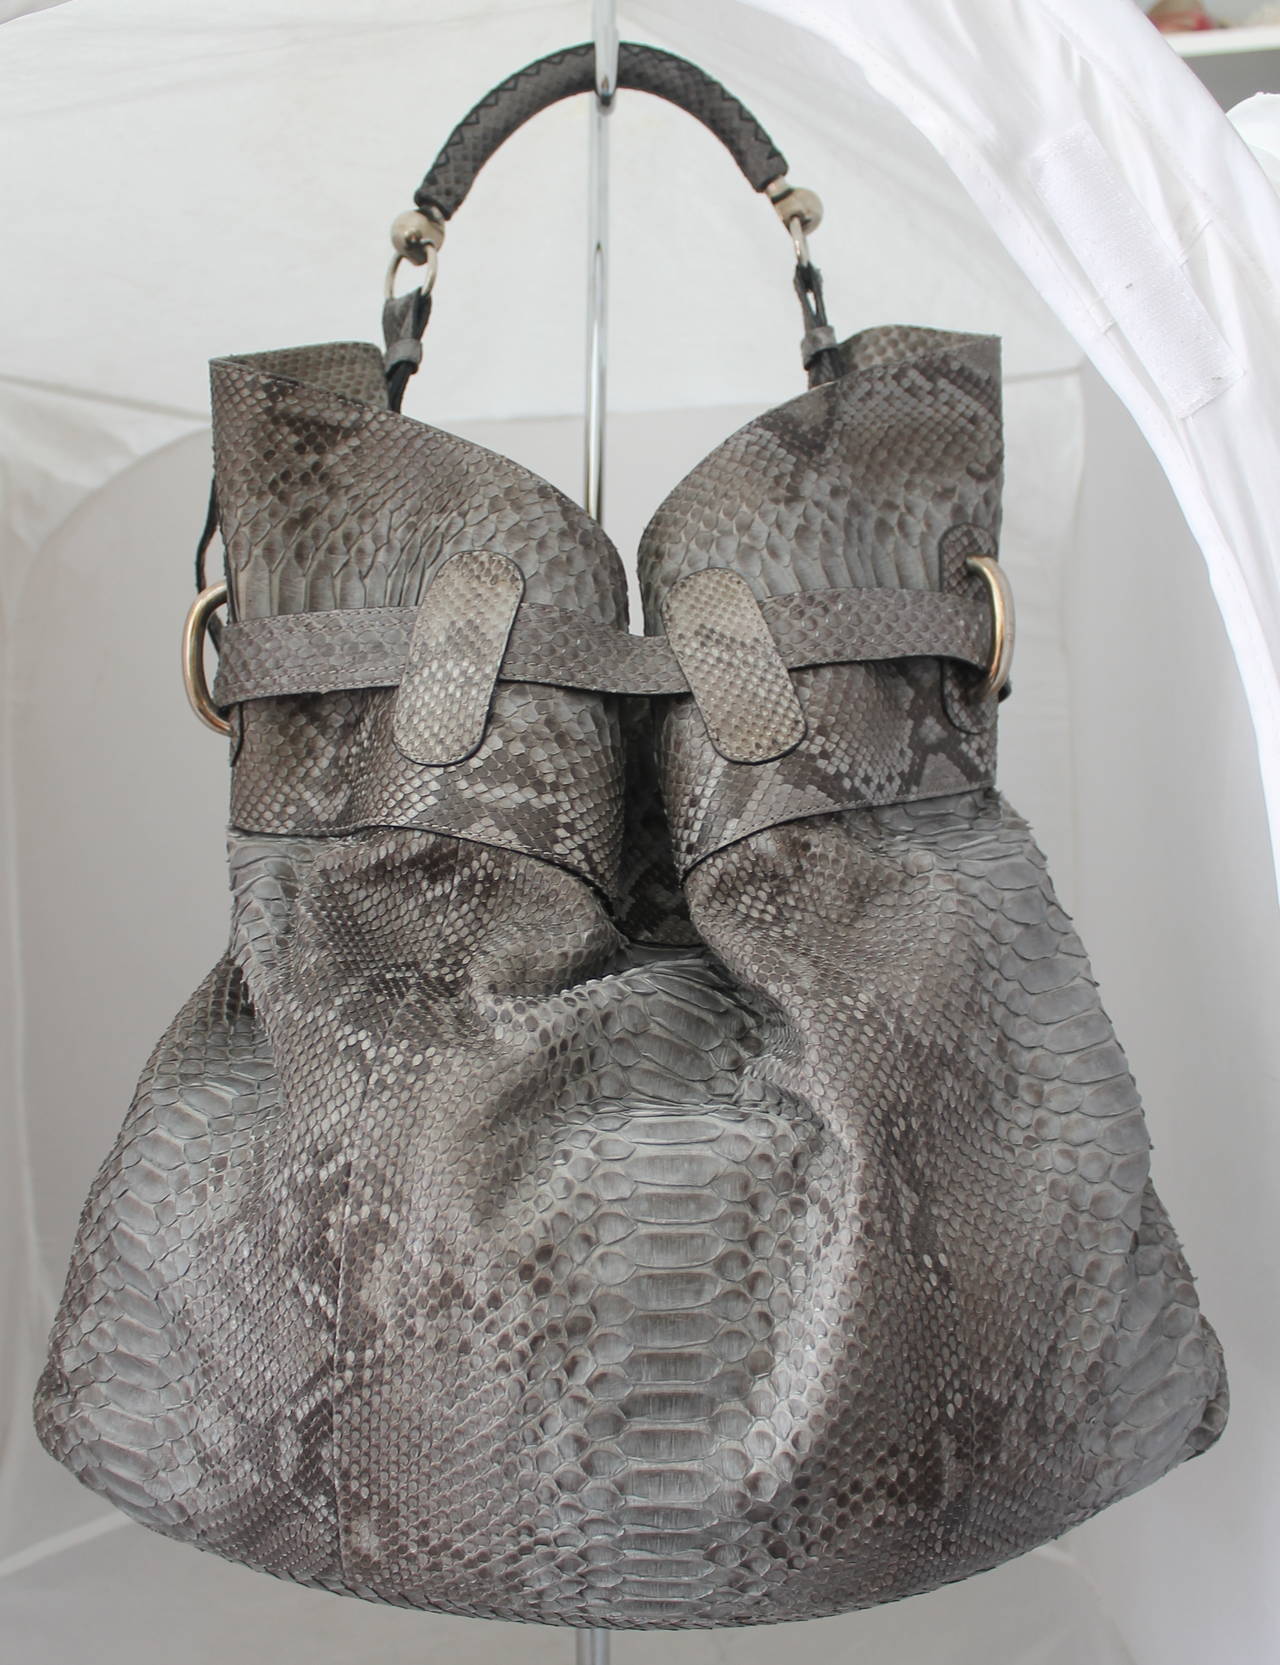 Burberry Grey Python Hobo-Style Large Tote . This bag is in excellent condition and has never been worn. It has a longer strap to crossbody and has a couple pockets in the front. The inside has 3 sections with the middle one being able to zip. It